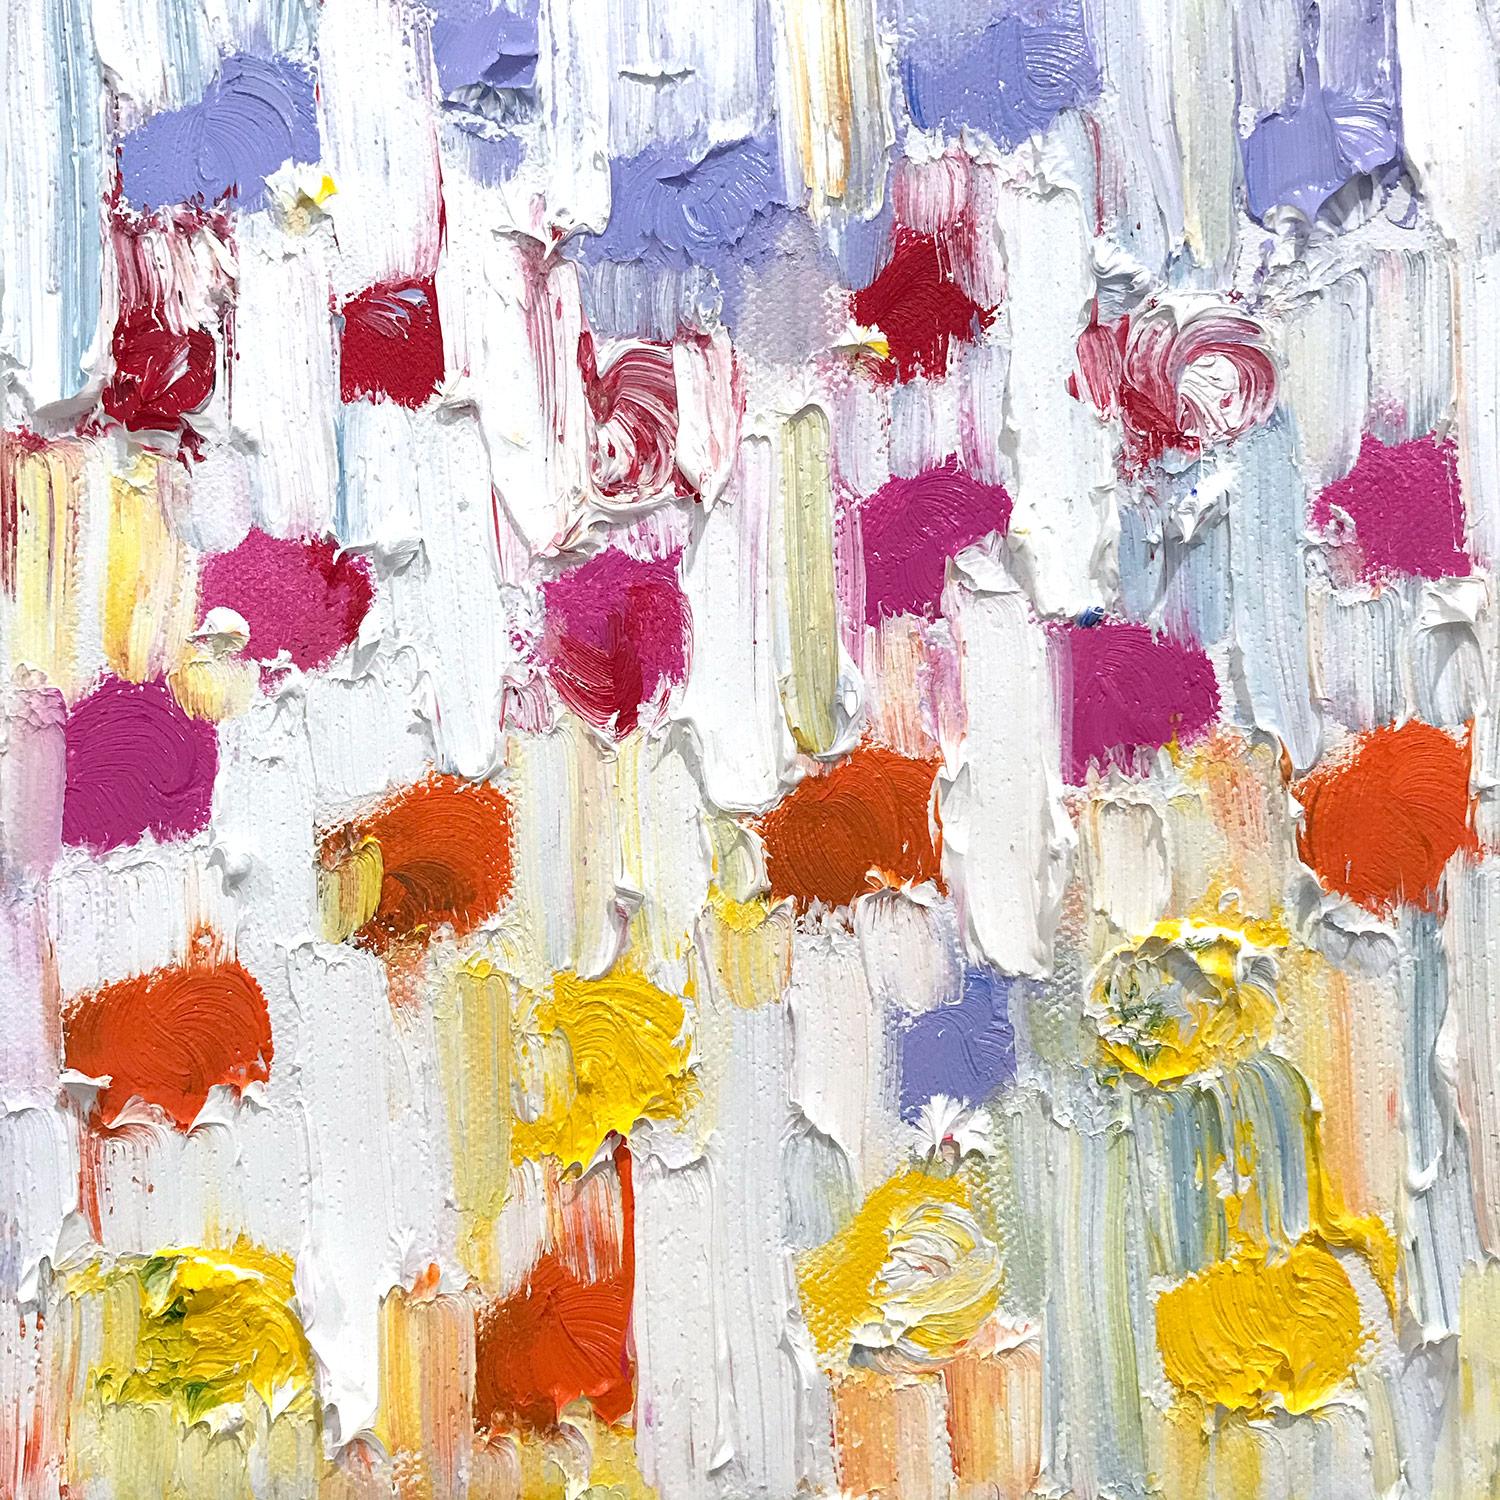 Cindy Shaoul Abstract Painting - "Dripping Dots -  Mini Rainbow" Colorful Abstract Oil Painting on Canvas